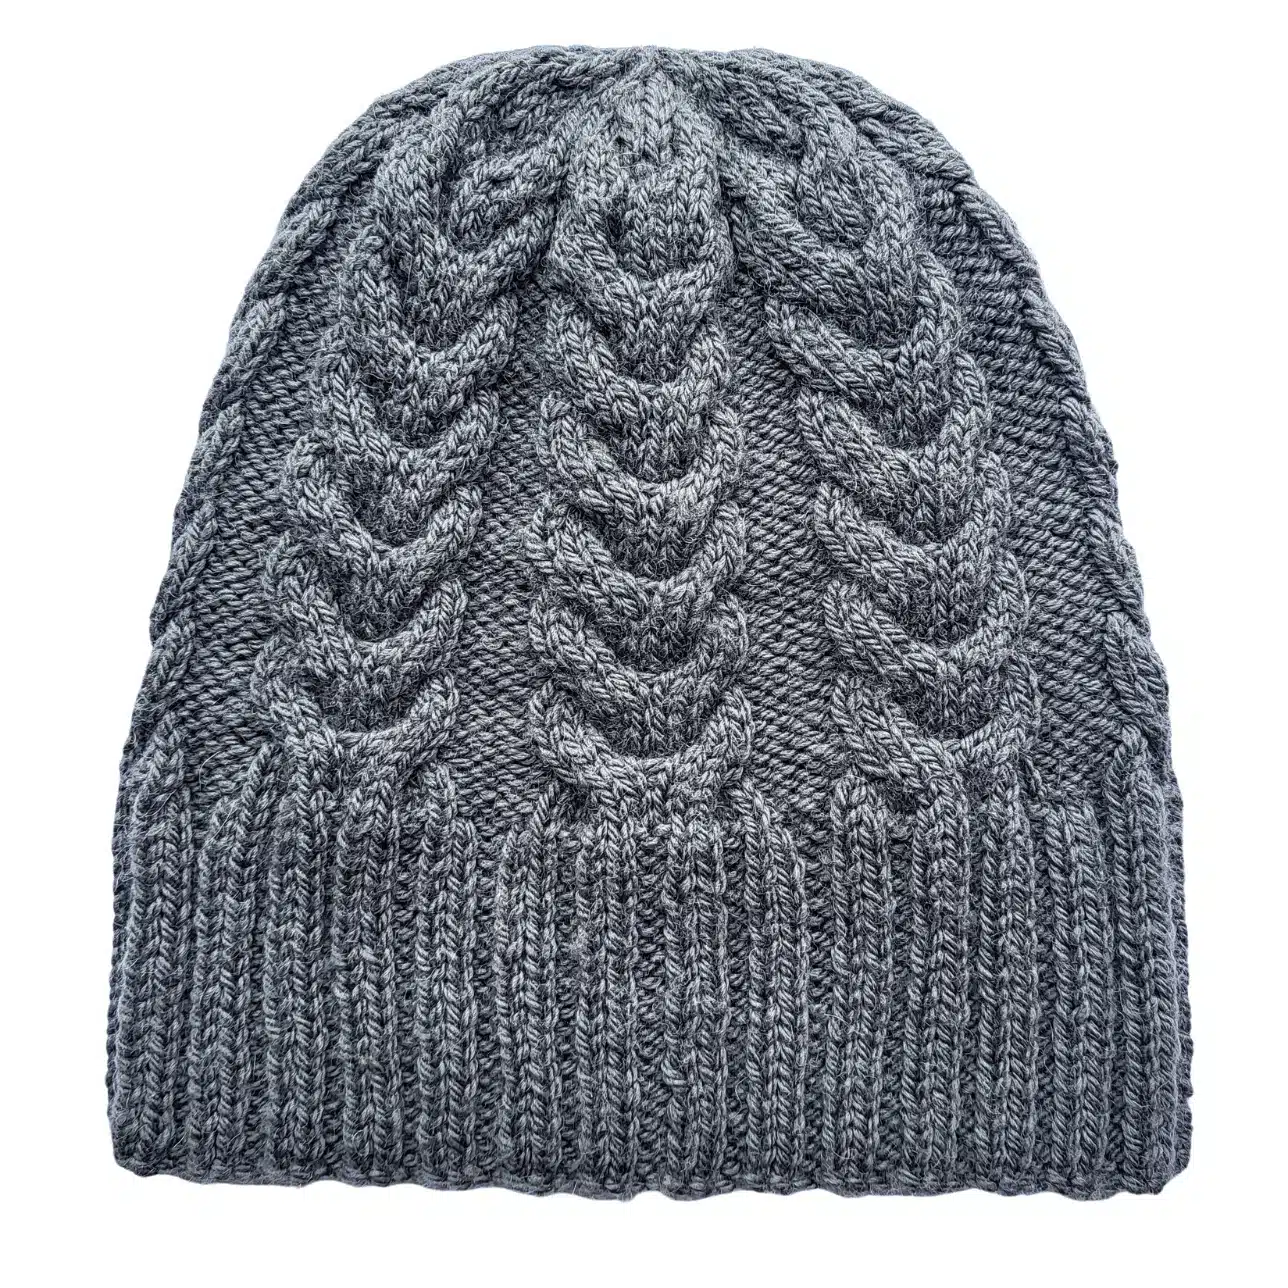 Sitting Knitting kit - Staghorn Cable hat